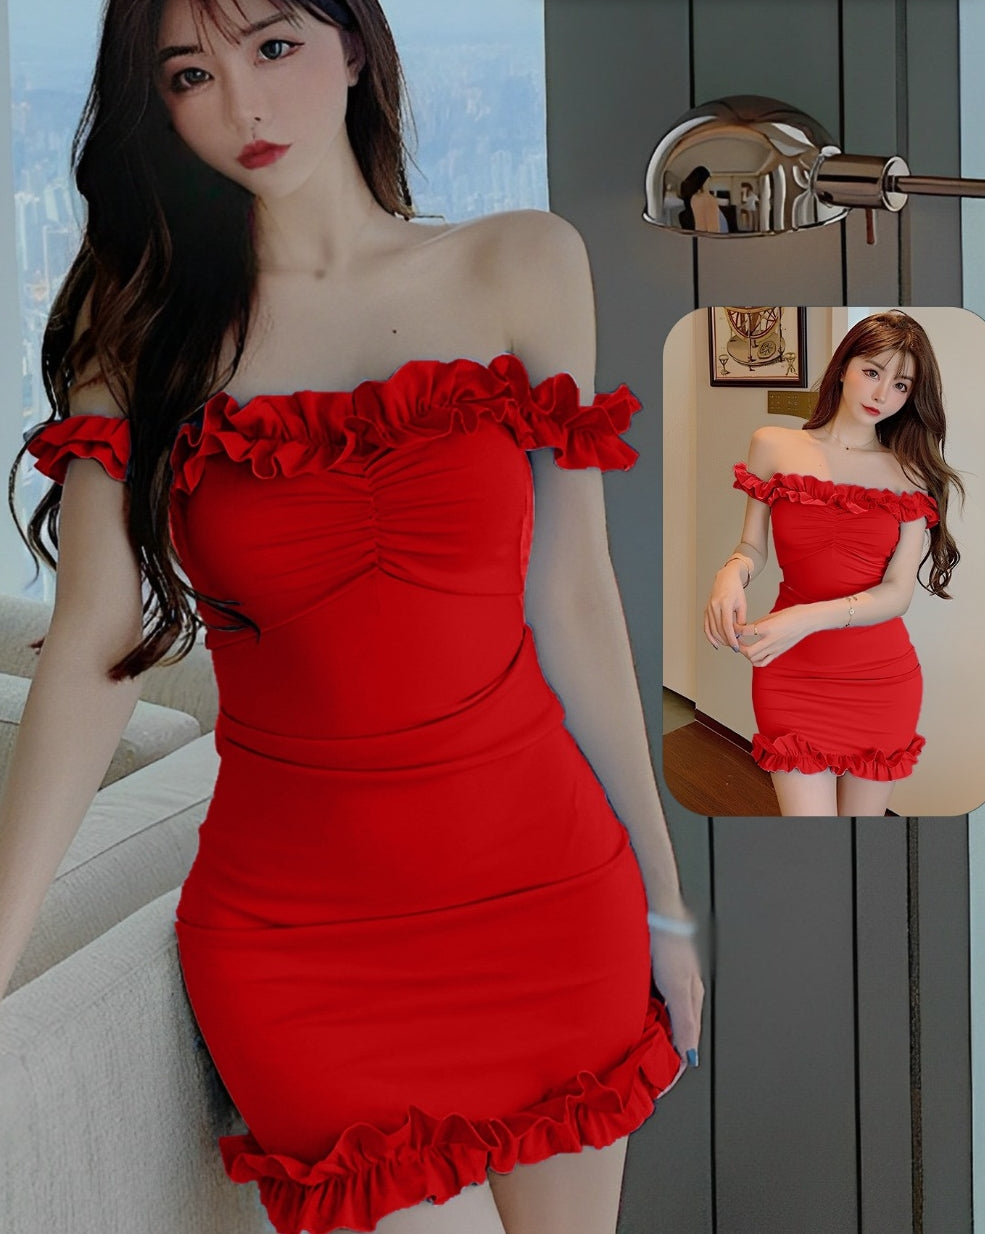 Lycra off-shoulder house dress - with ruffles from the tail and at the chest